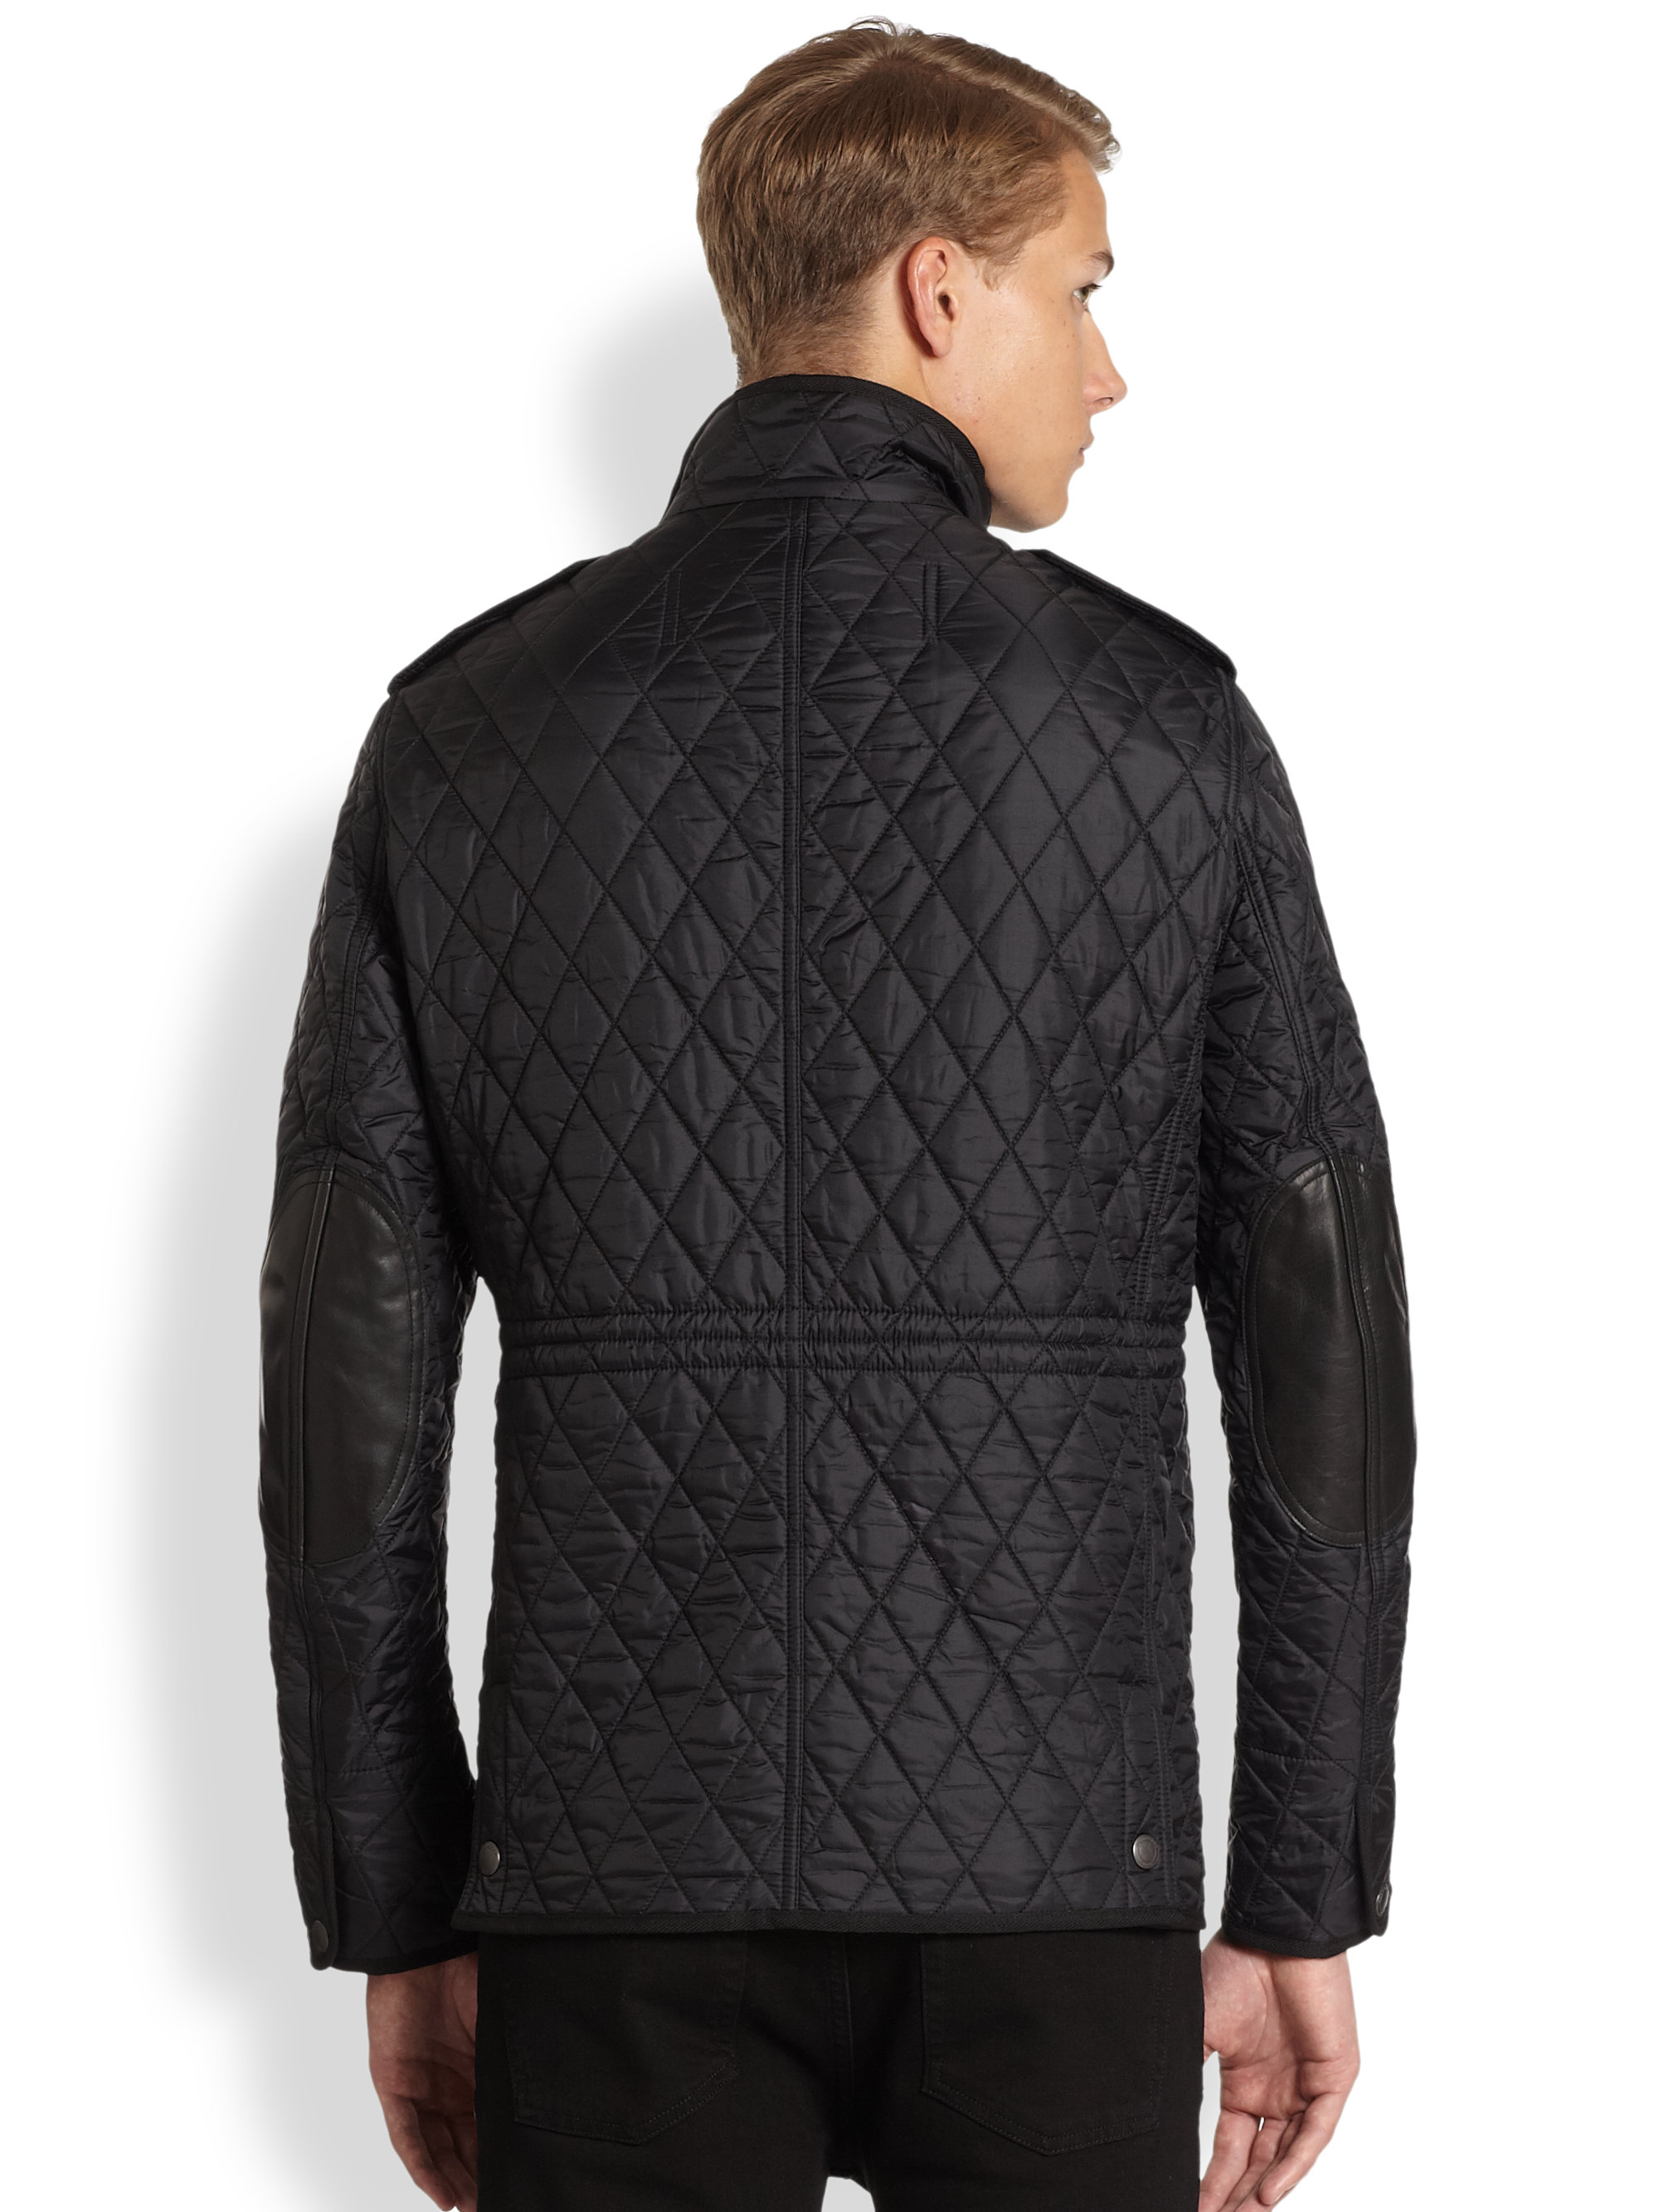 Lyst Burberry Brit Russell Quilted Jacket In Black For Men 2999